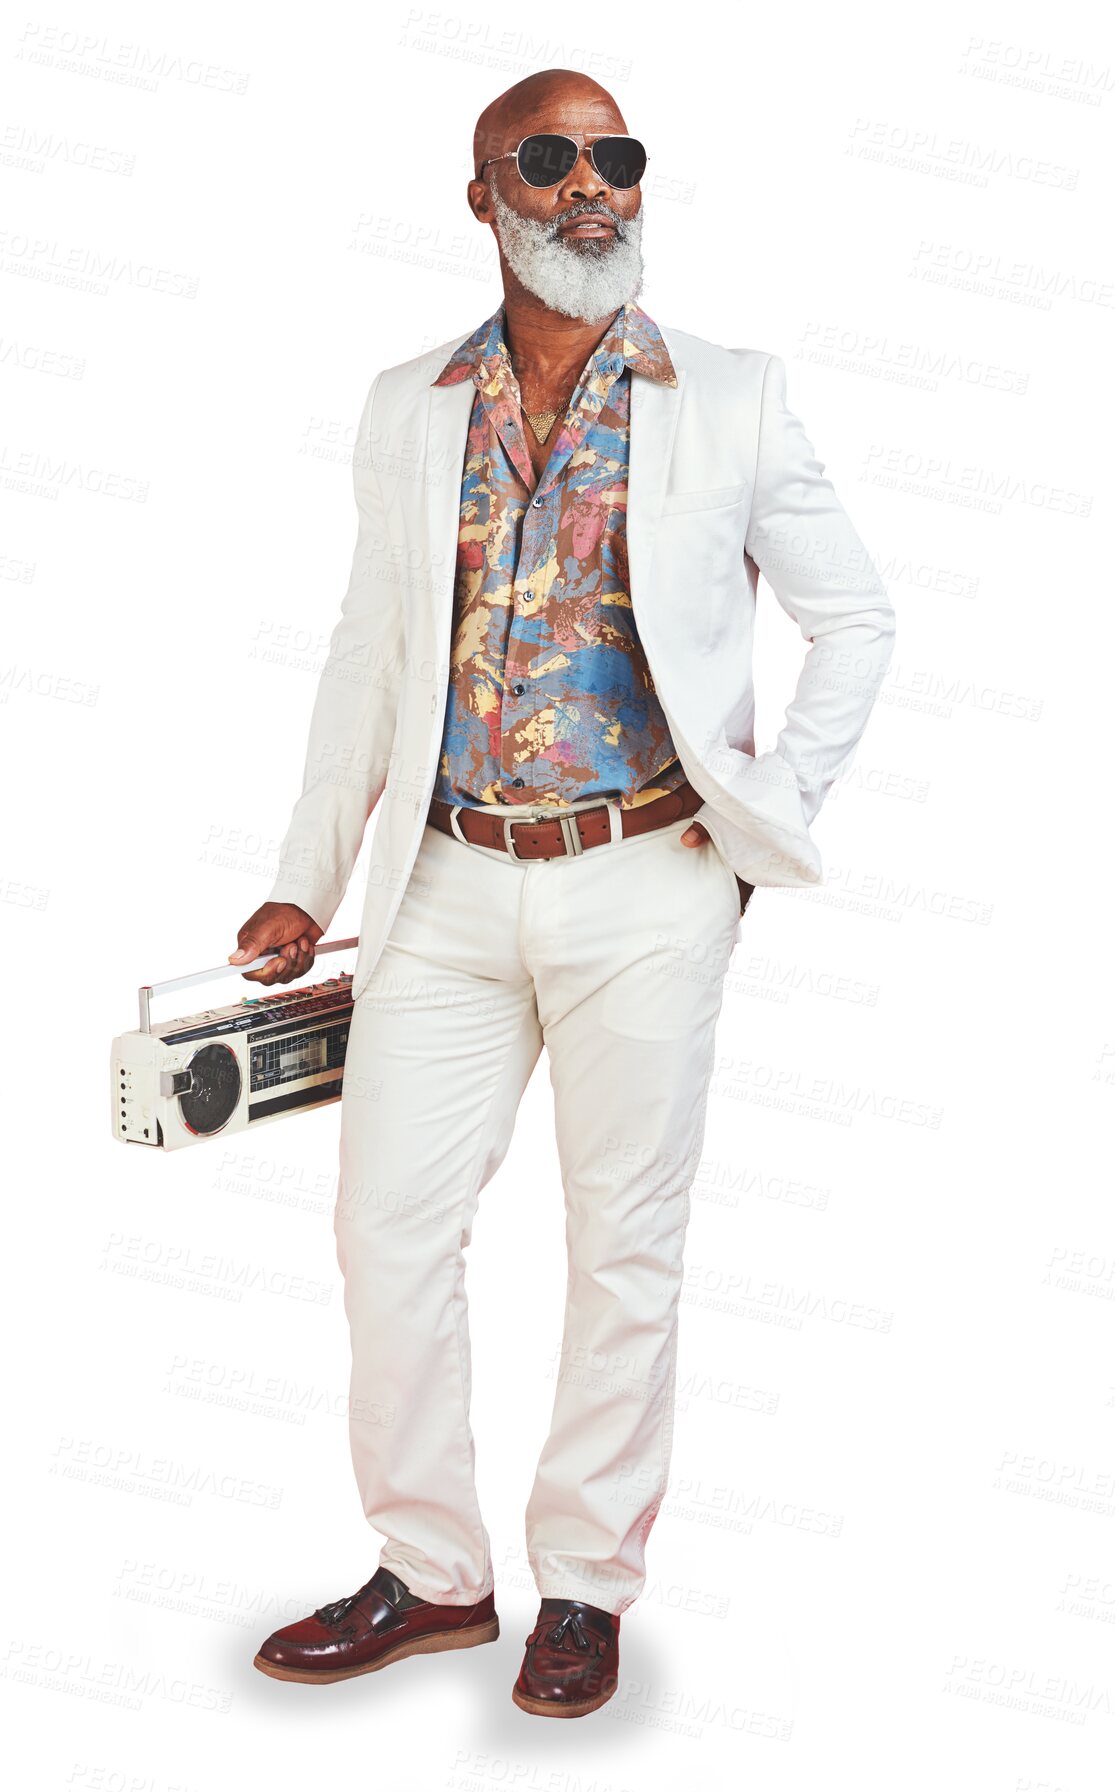 Buy stock photo Thinking, fashion and boombox with a senior black man isolated on a transparent background for music. Radio, idea and style with an elderly person listening to audio sound on PNG while looking away